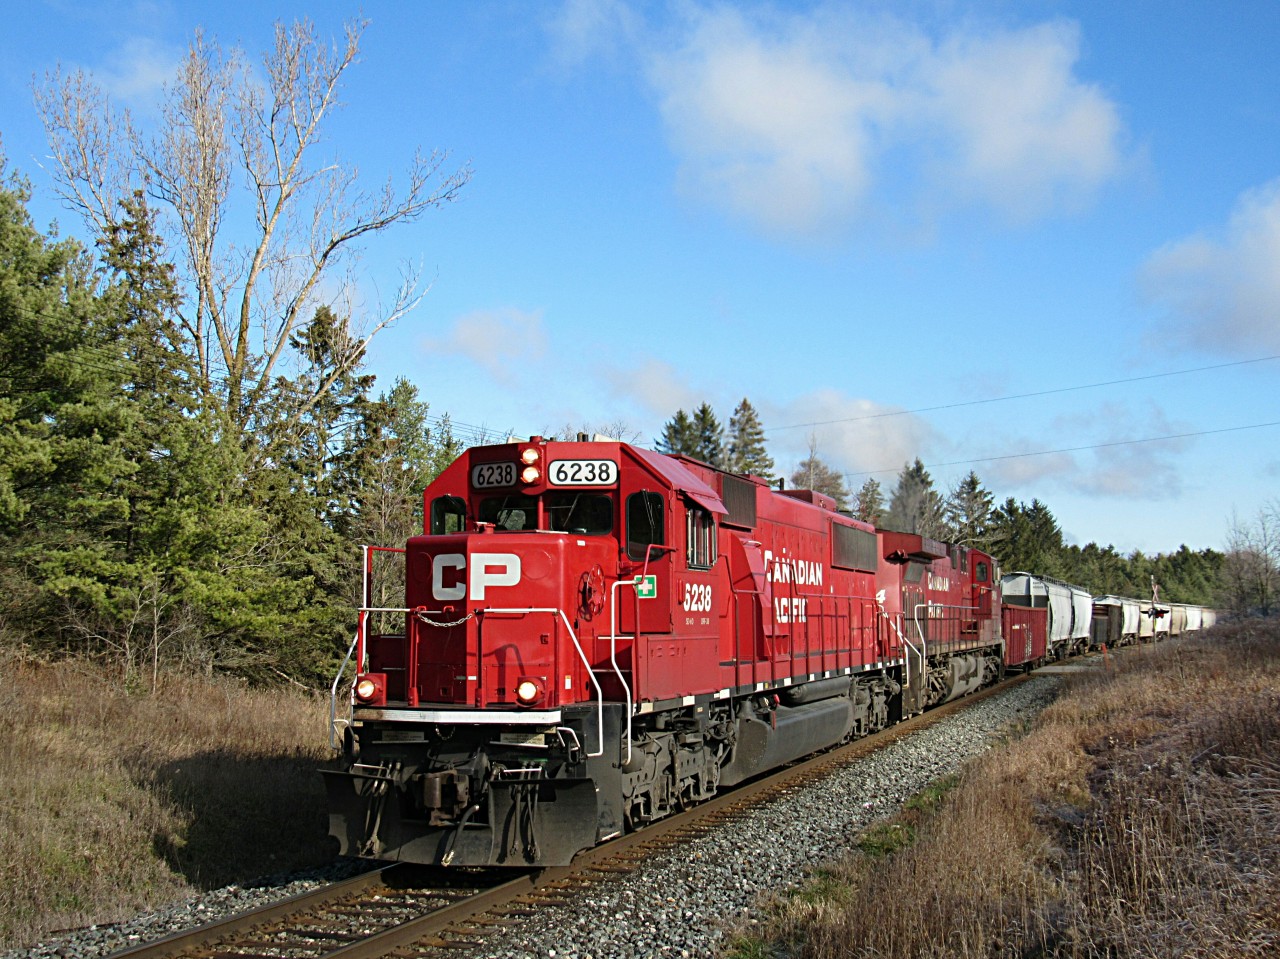 After hearing CP 6238 north on the Hamilton Sub, I knew it was 255. So I prepared for the shot at the Killean mile board at MP 54 Galt Sub. The sun came out just in time too.